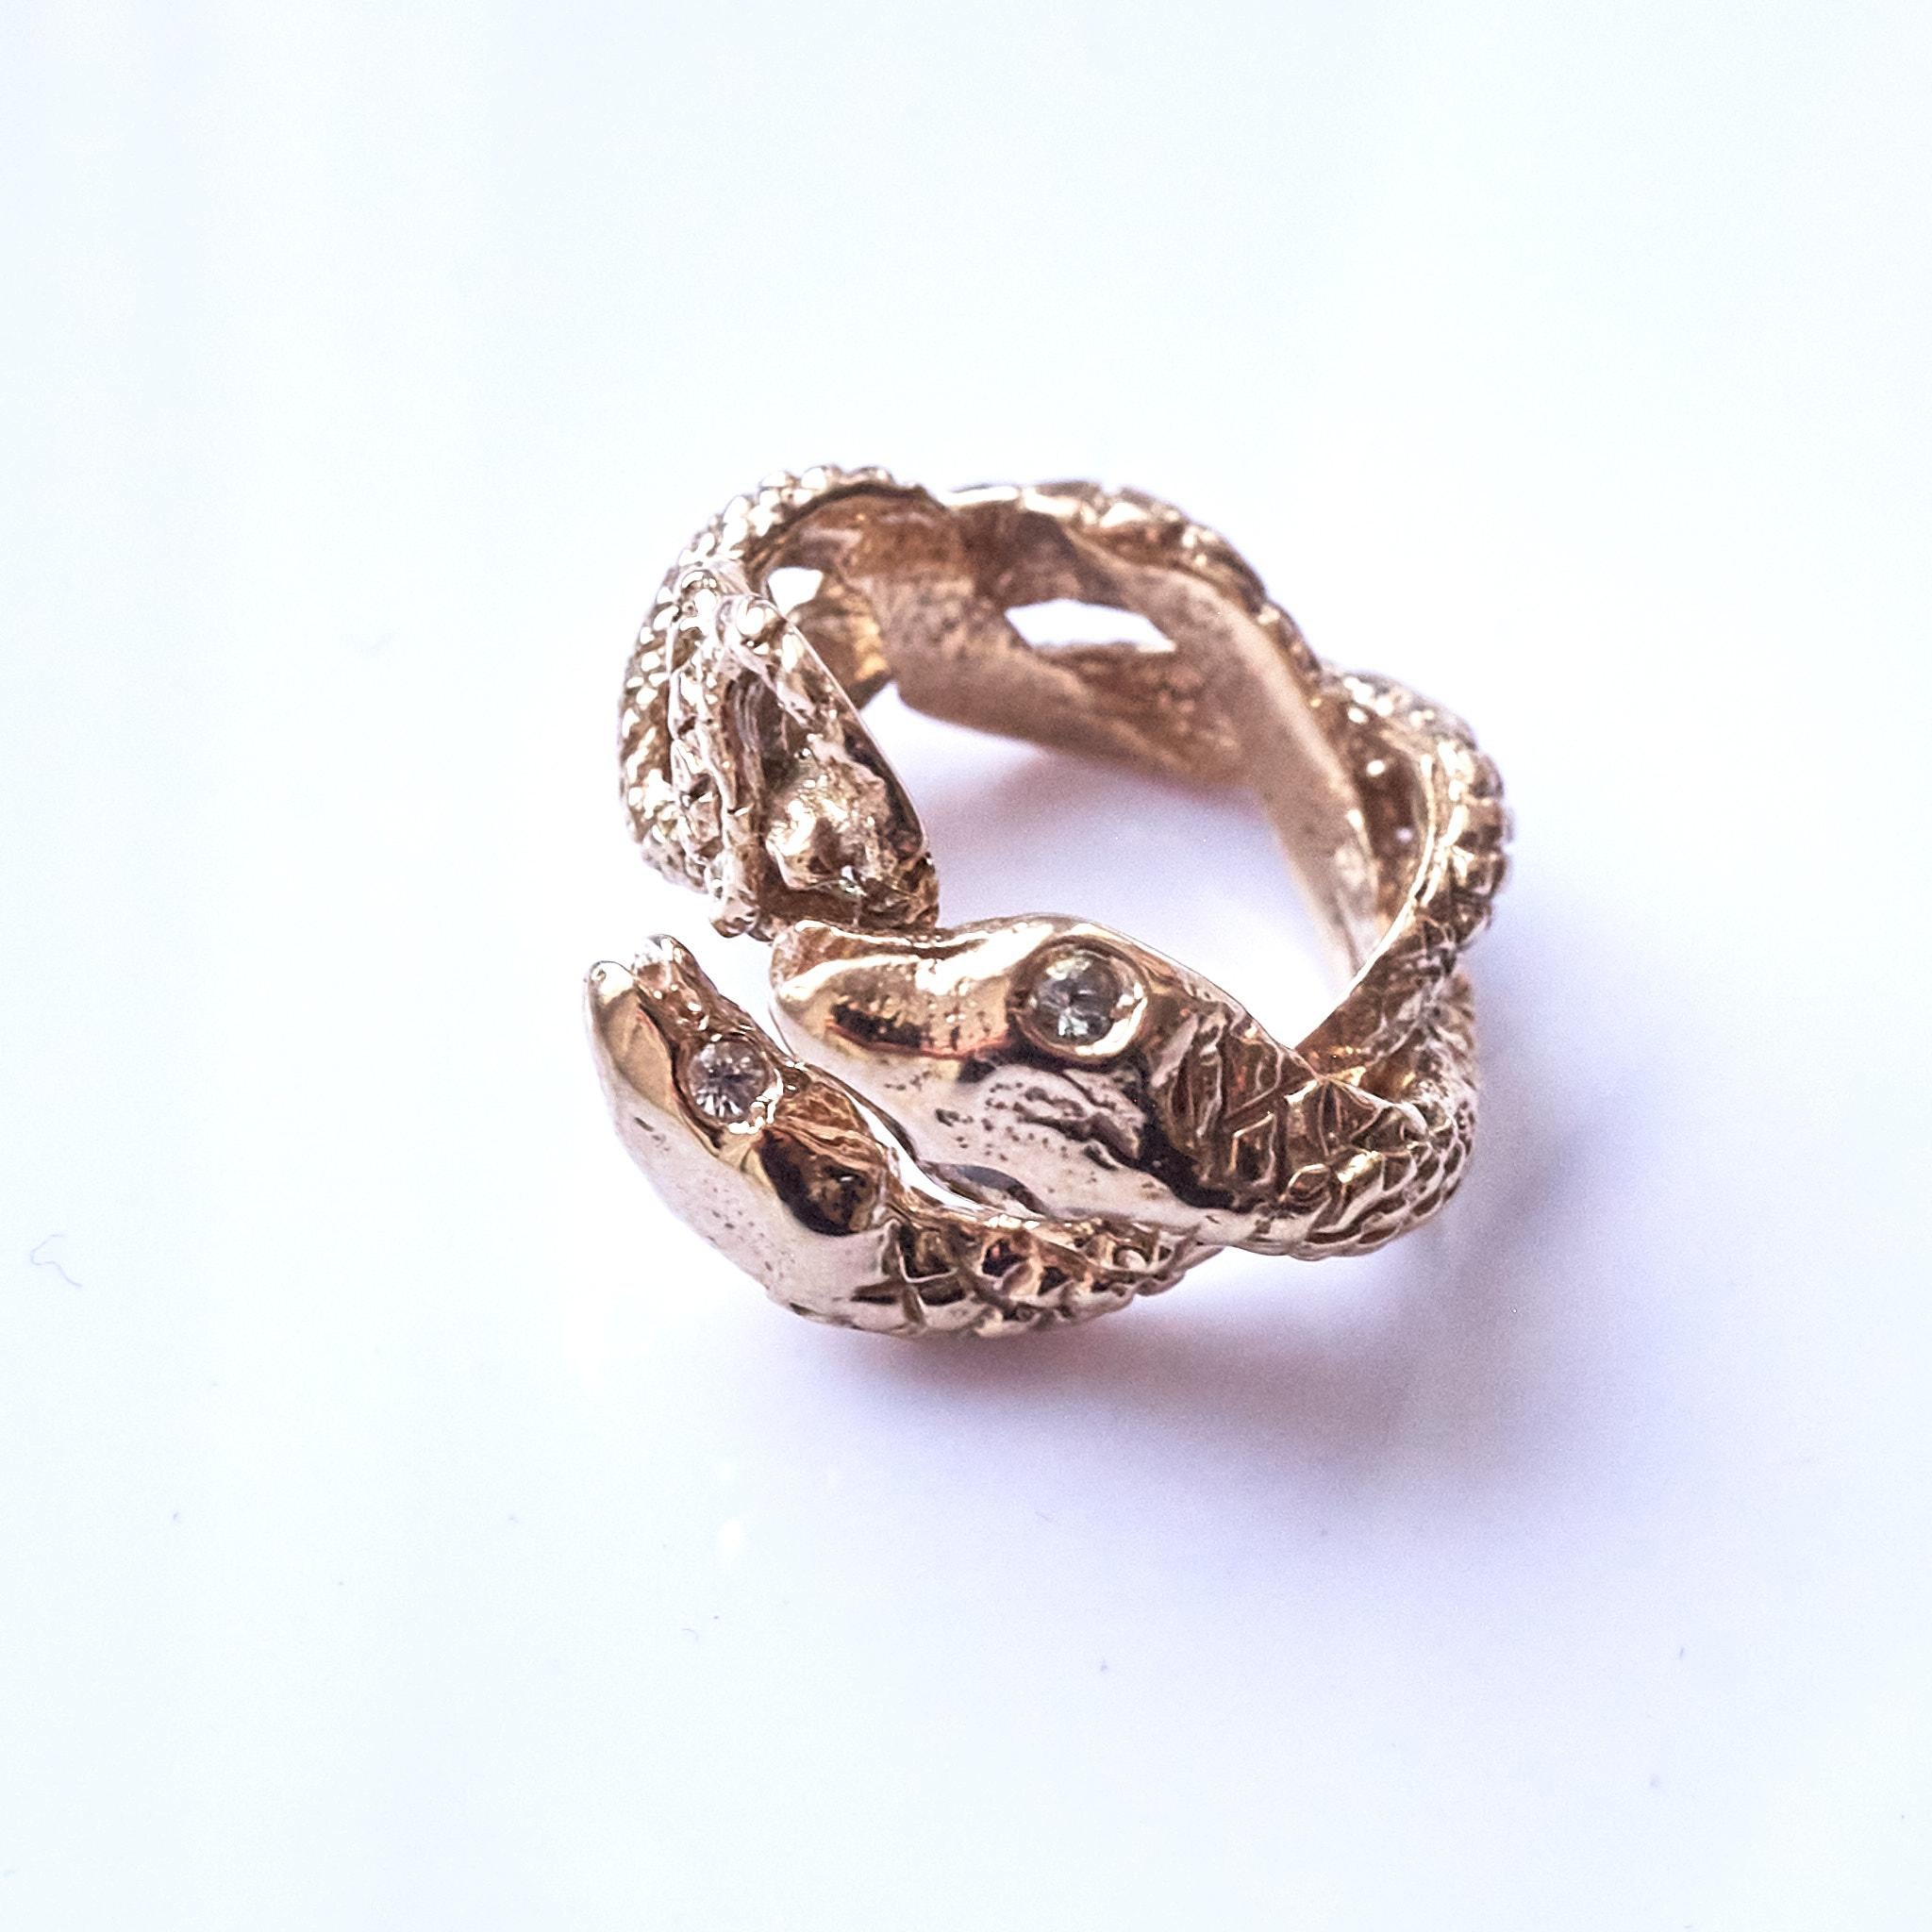 Animal jewelry Aquamarine Snake Ring Bronze Cocktail Ring J Dauphin For Sale 10